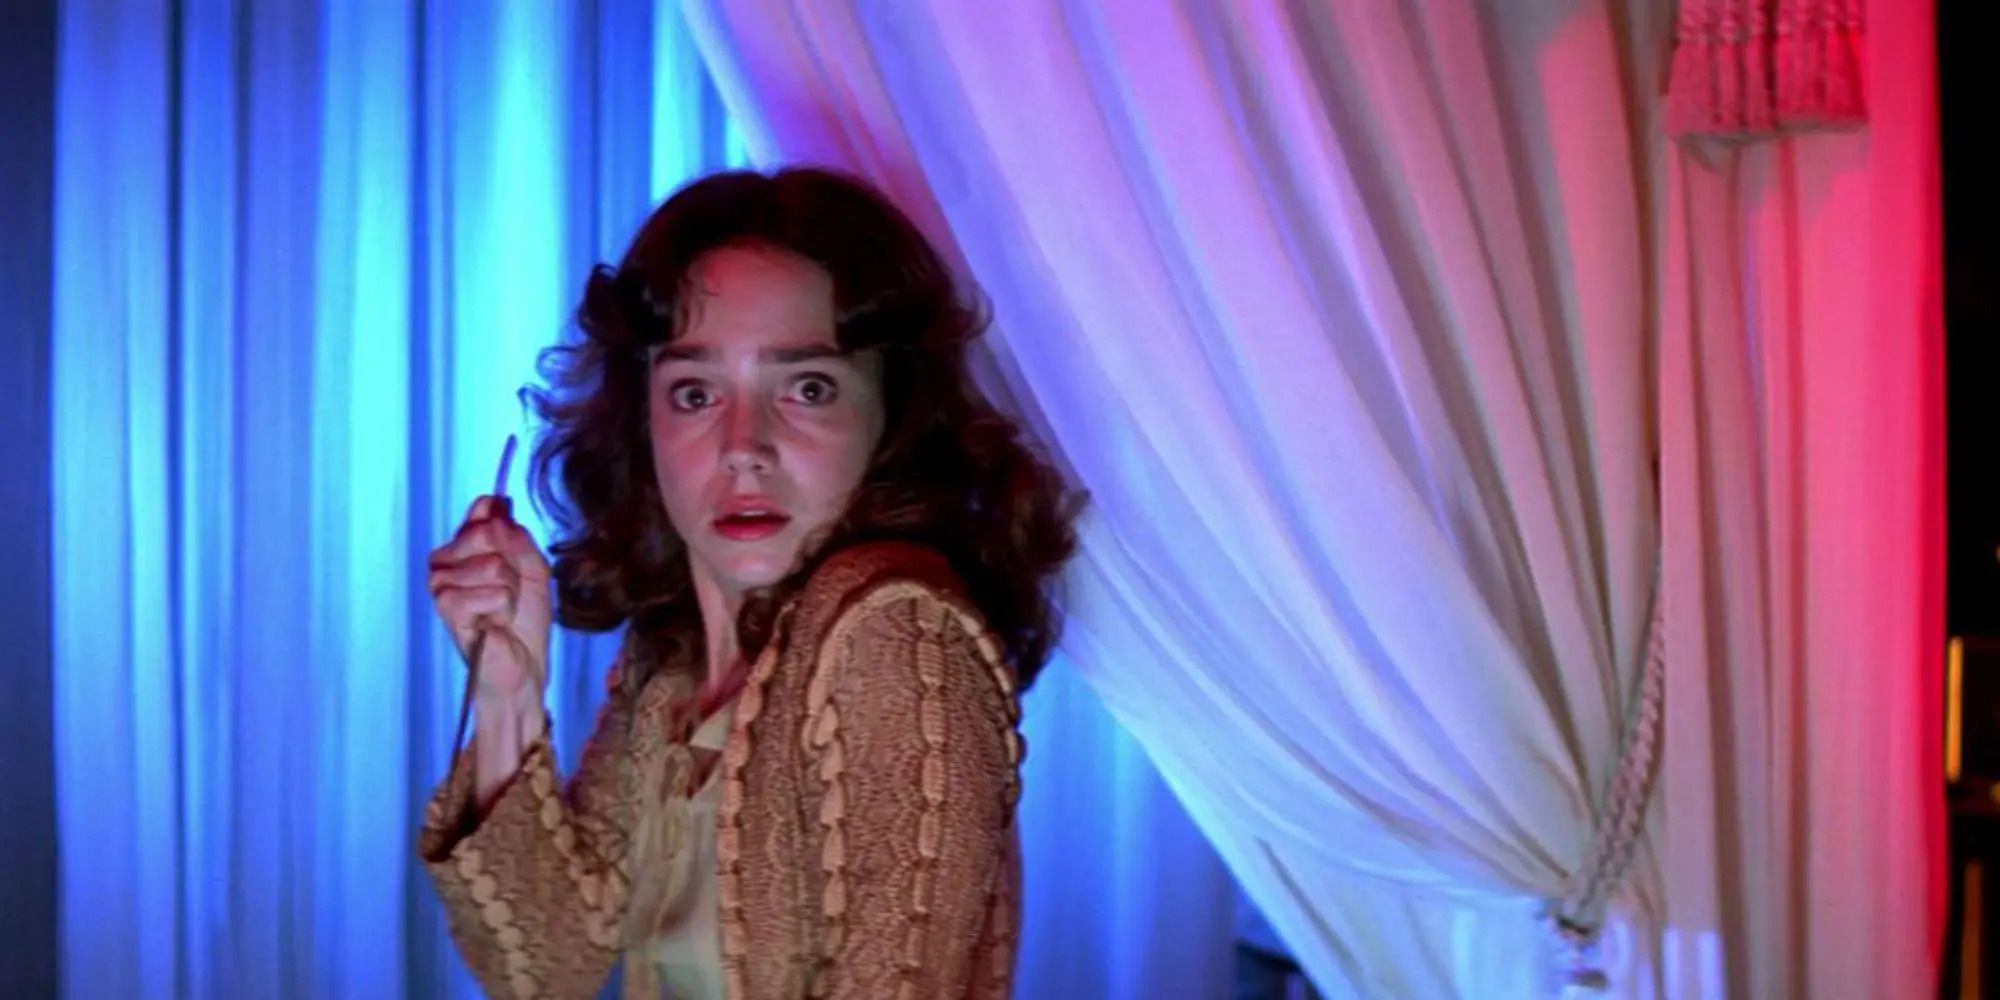 Suzy (Jessica Harper) holding a knife while standing in front of curtains in 'Suspiria'